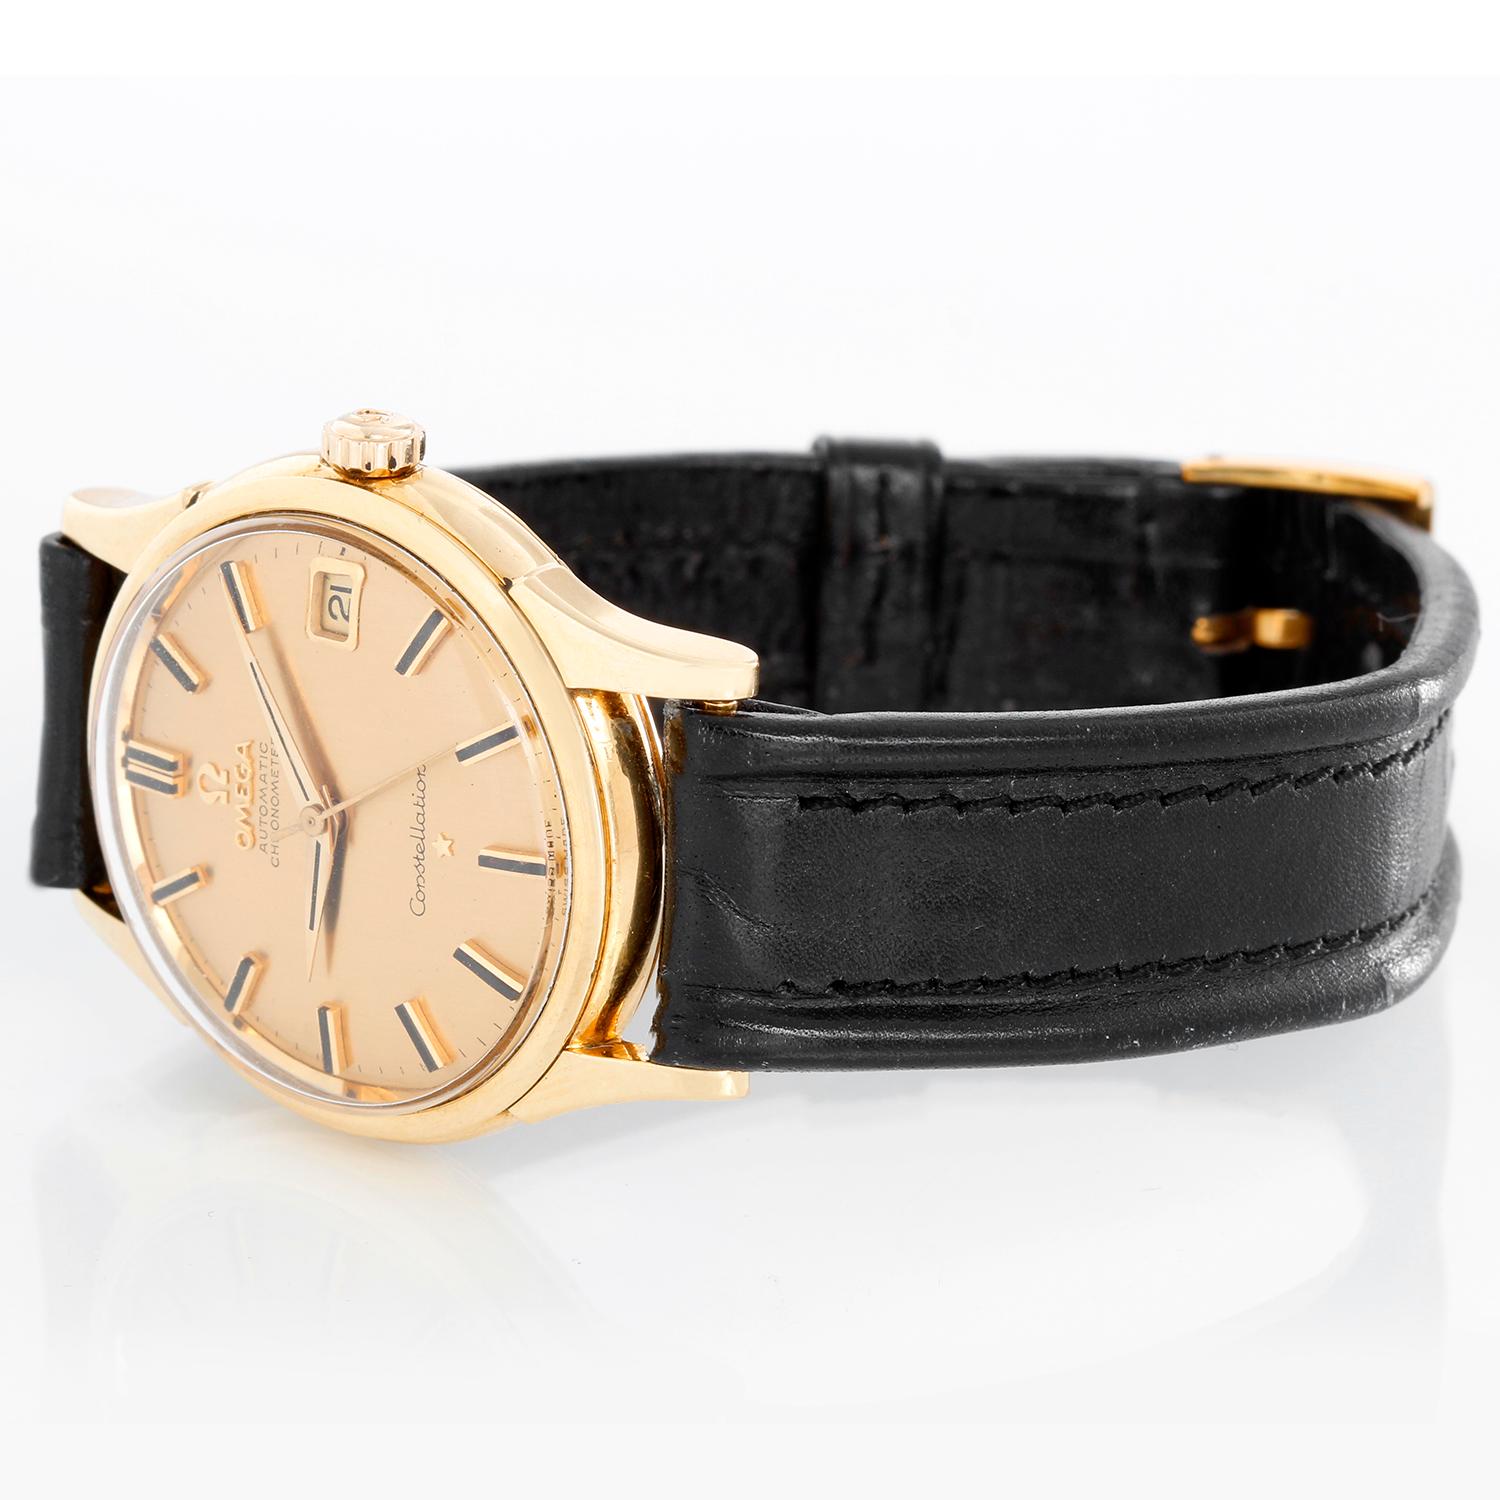 Vintage Omega Constellation Men's Watch - Automatic winding. 18K  Yellow gold (34 mm). Champagne dial with raised stick hour markers. Black leather strap with omega  buckle. Pre-owned with Omega box and book. 